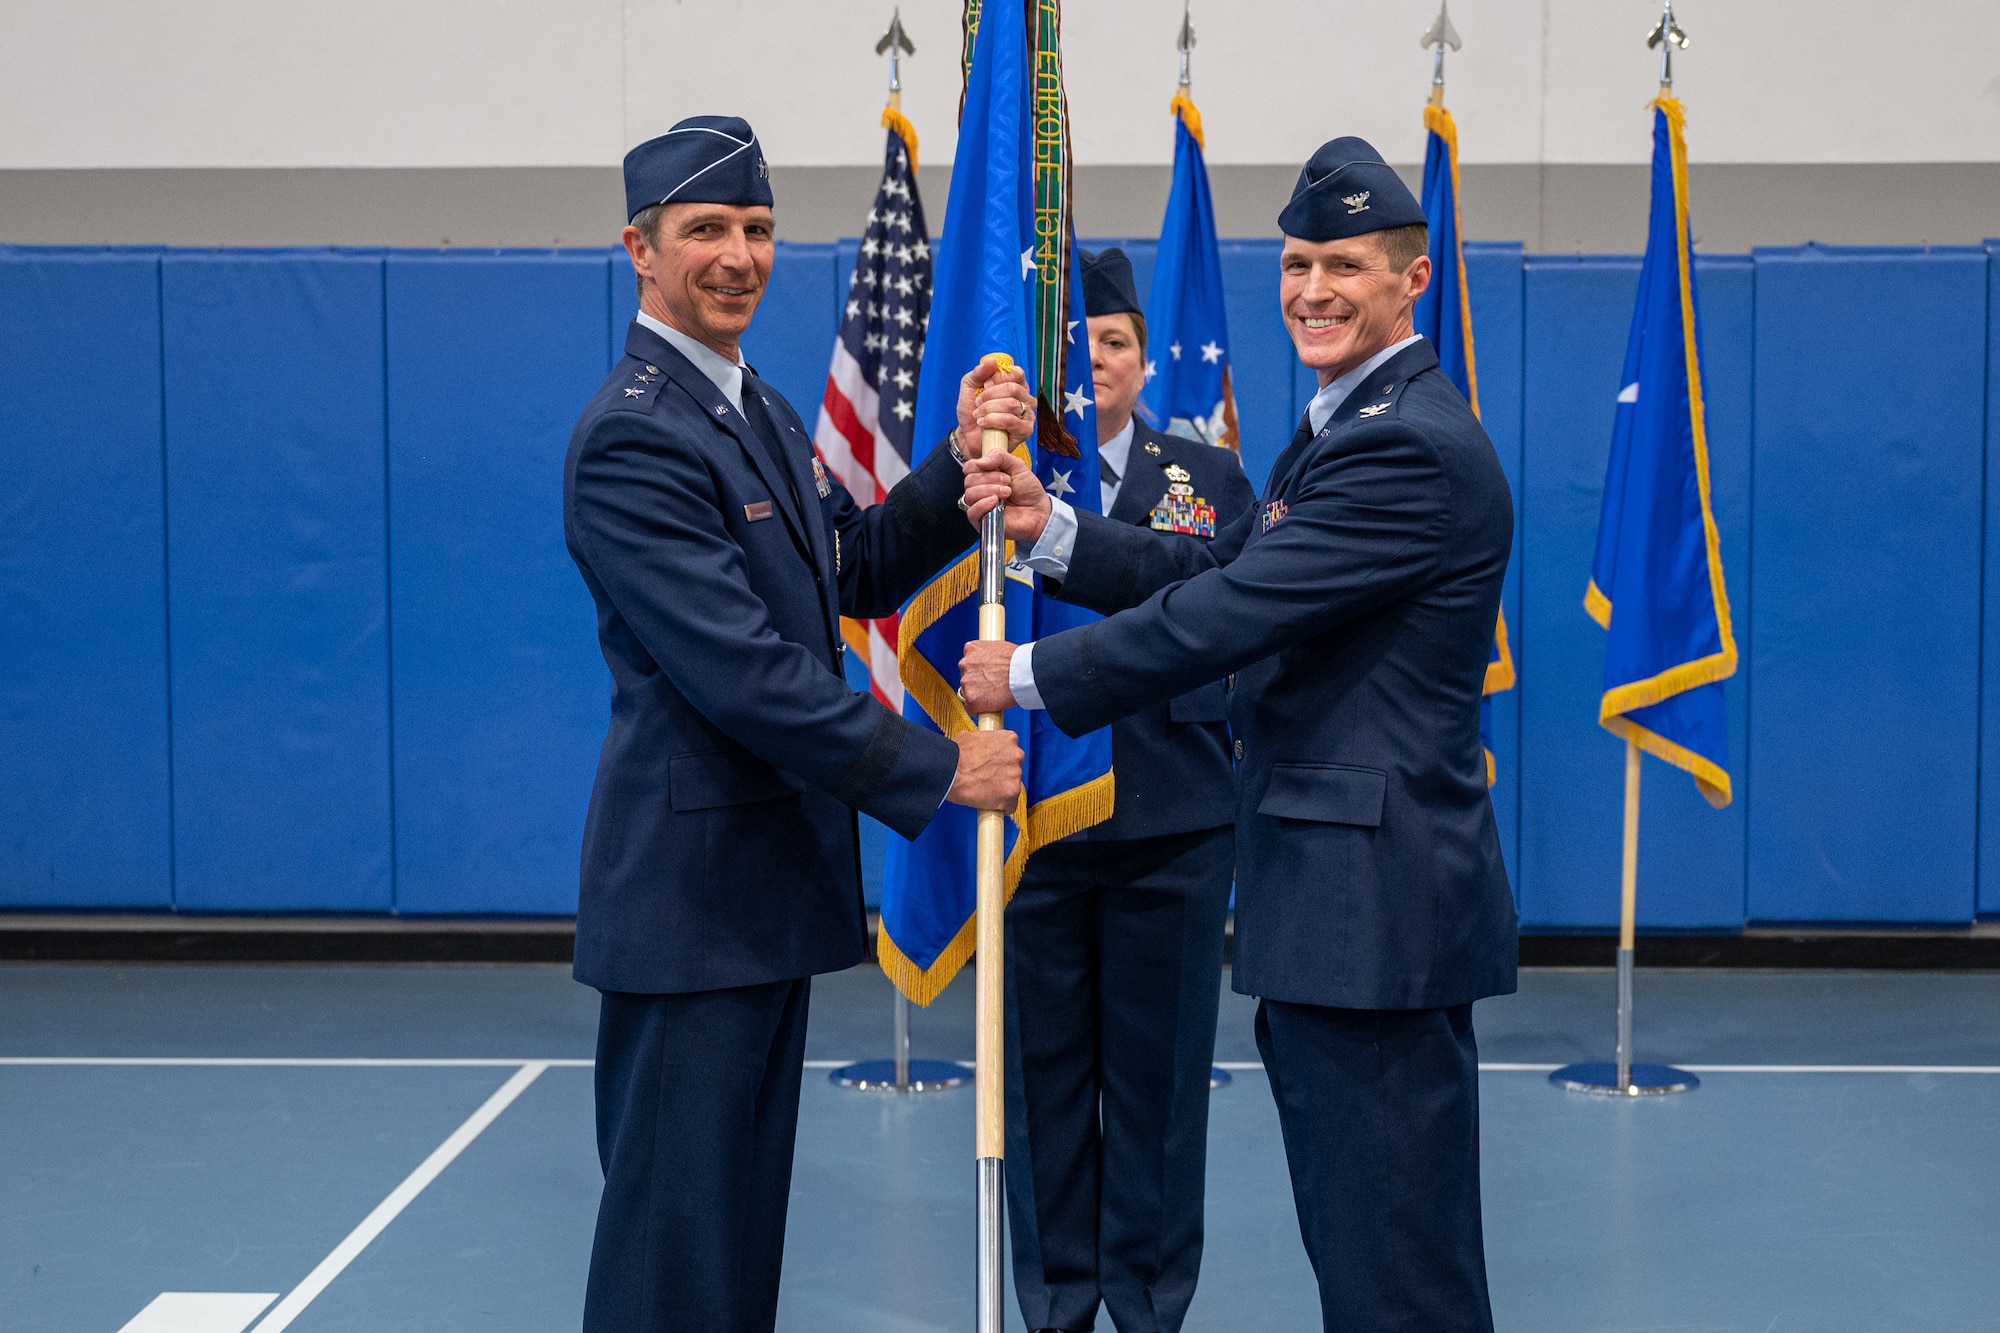 two individuals holding a flag, and posing for a photo.